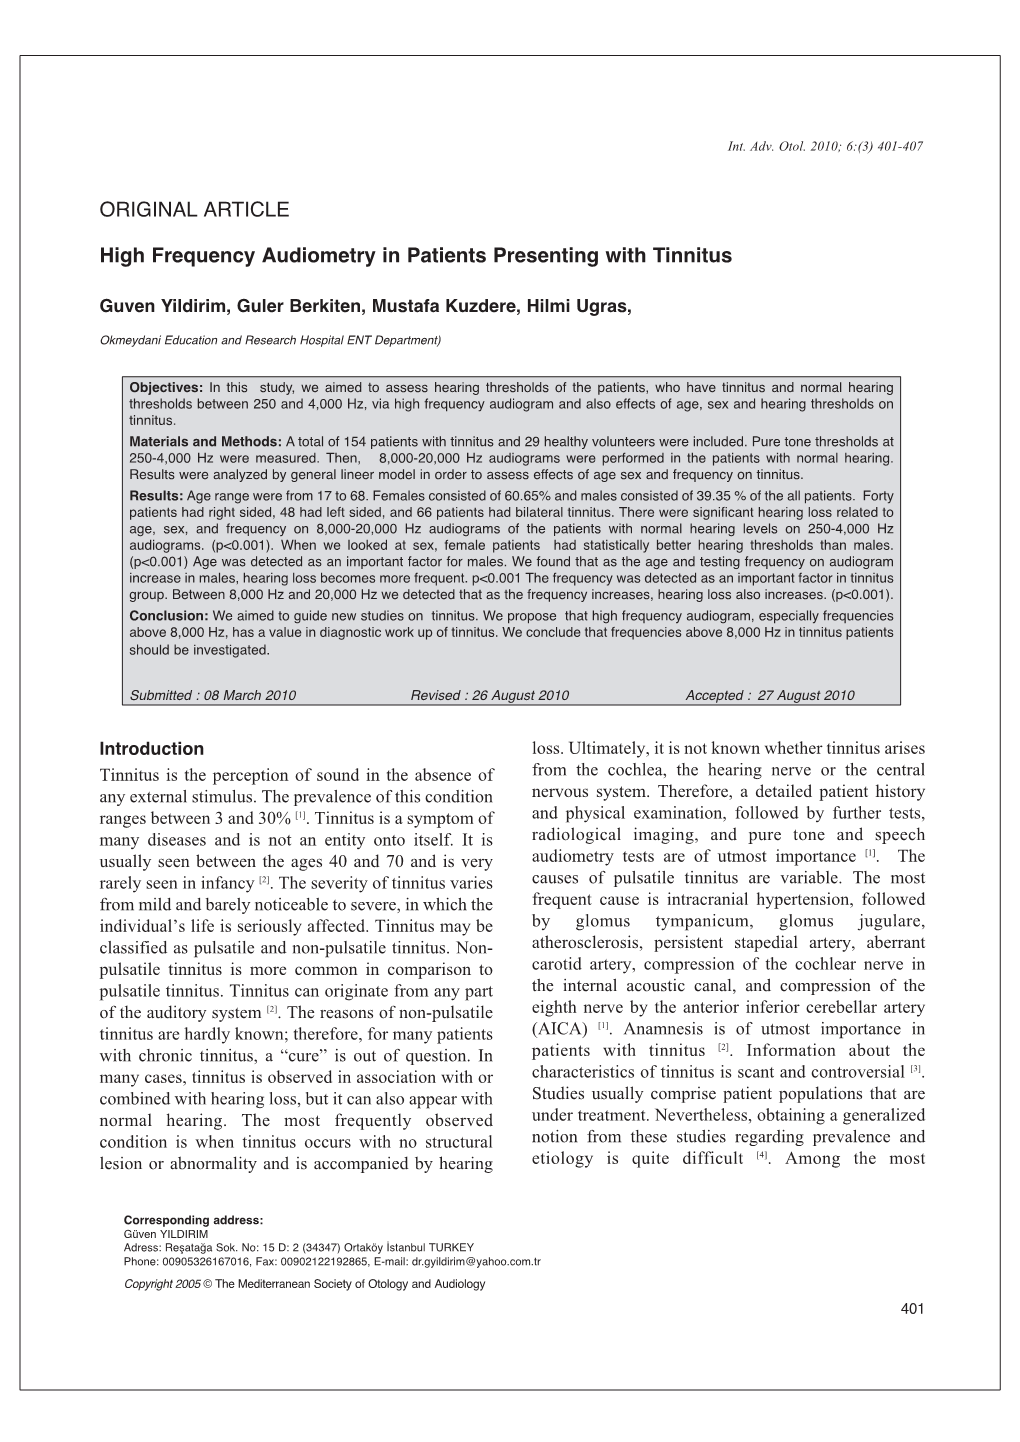 ORIGINAL ARTICLE High Frequency Audiometry in Patients Presenting